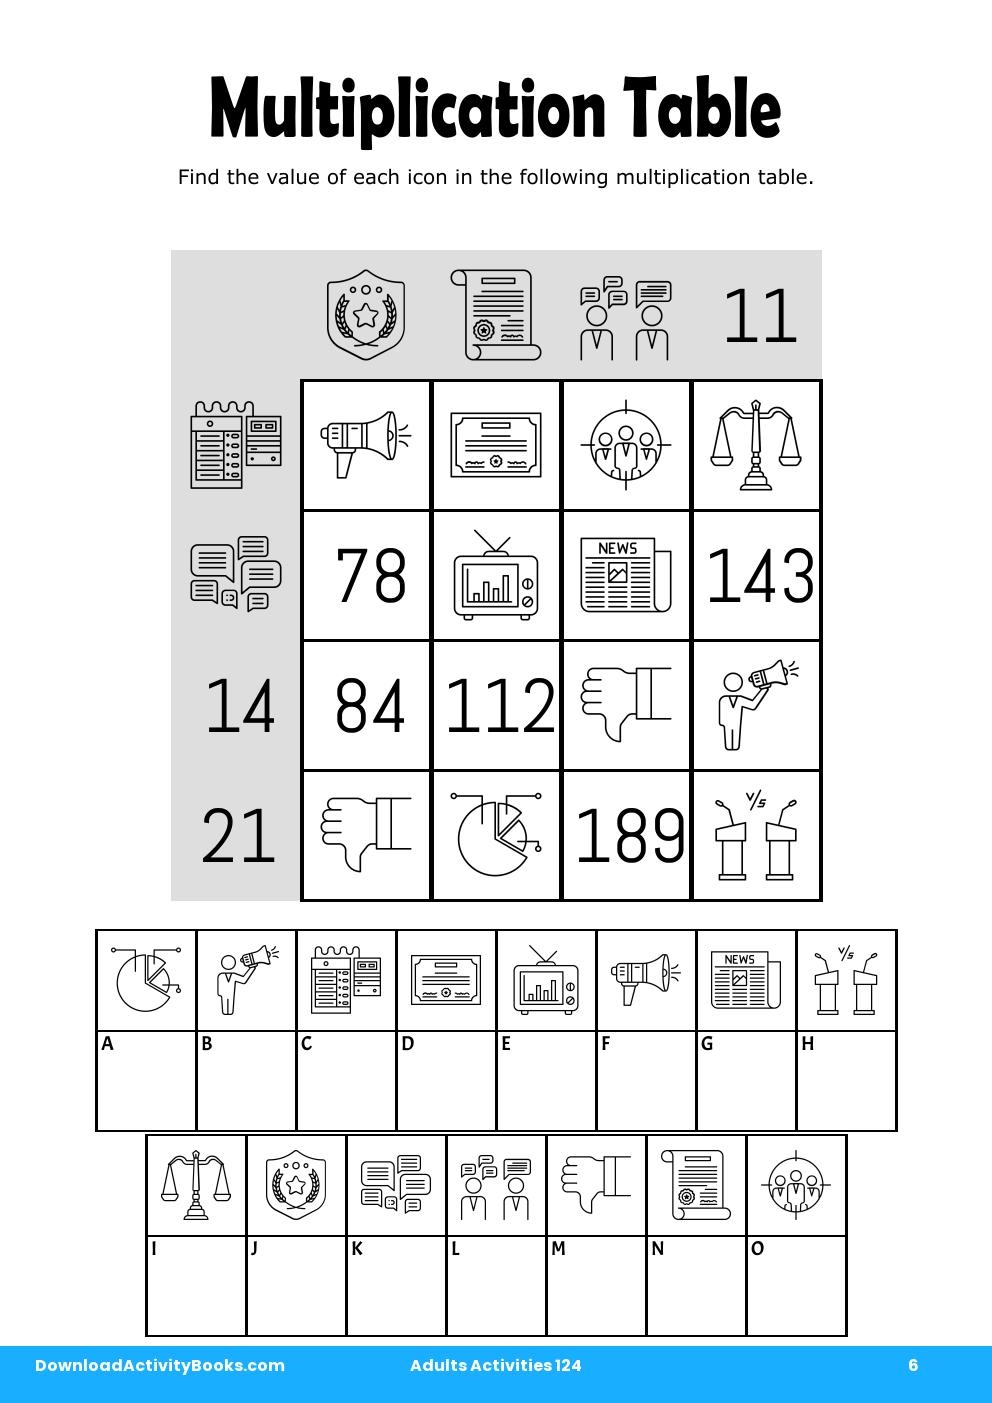 Multiplication Table in Adults Activities 124